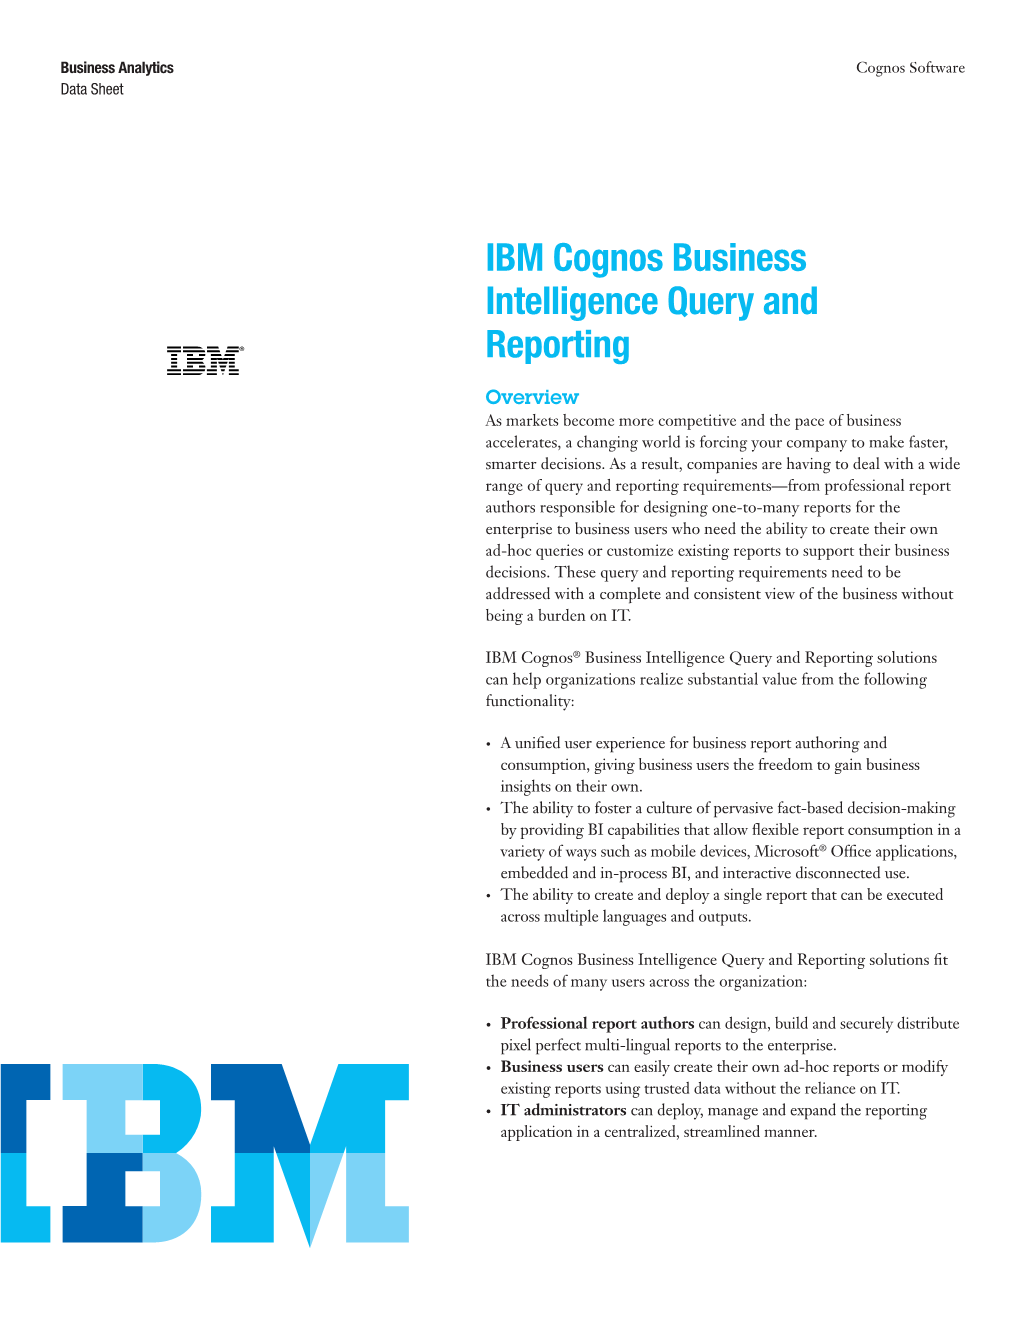 IBM Cognos Business Intelligence Query and Reporting